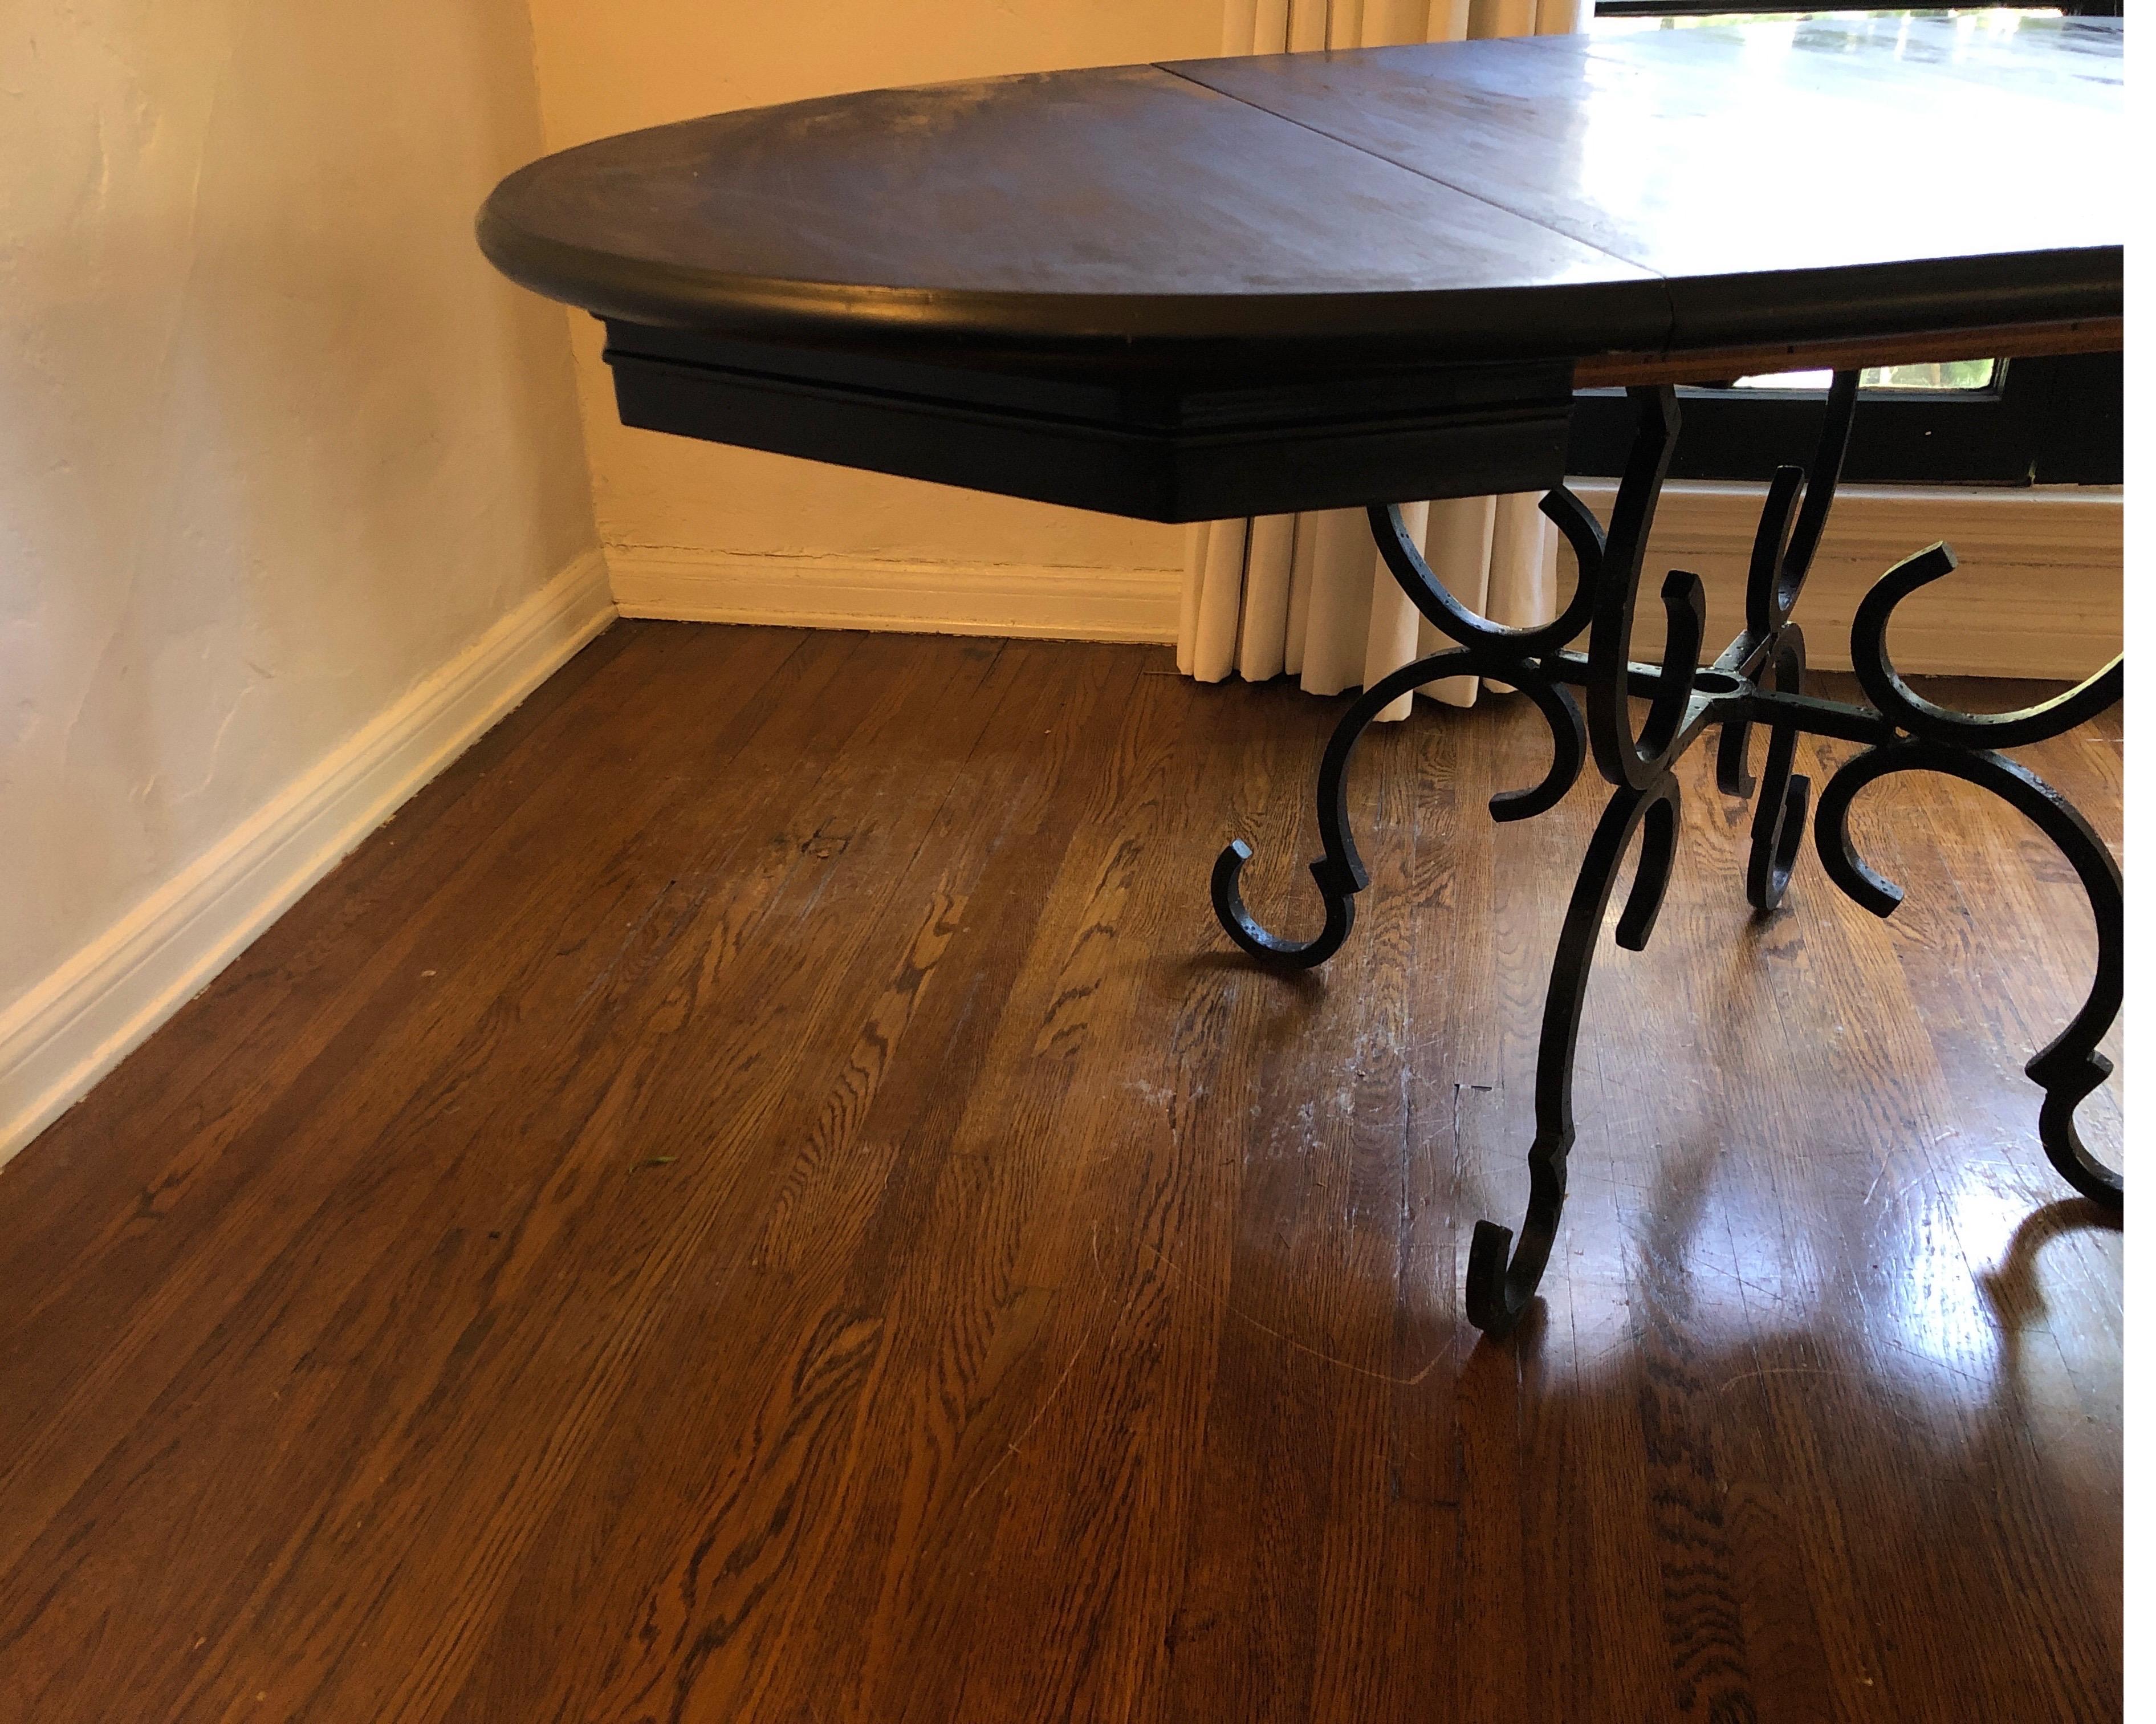 Hand forged iron base table with lacquered black extension table.
Base made in France, top made in USA. 

Has three different extensions at the following dimensions:
6 ft 4 x 40
5 ft 4 x 40
4 ft 4 x 40
3 ft 4 circle (40 inches).